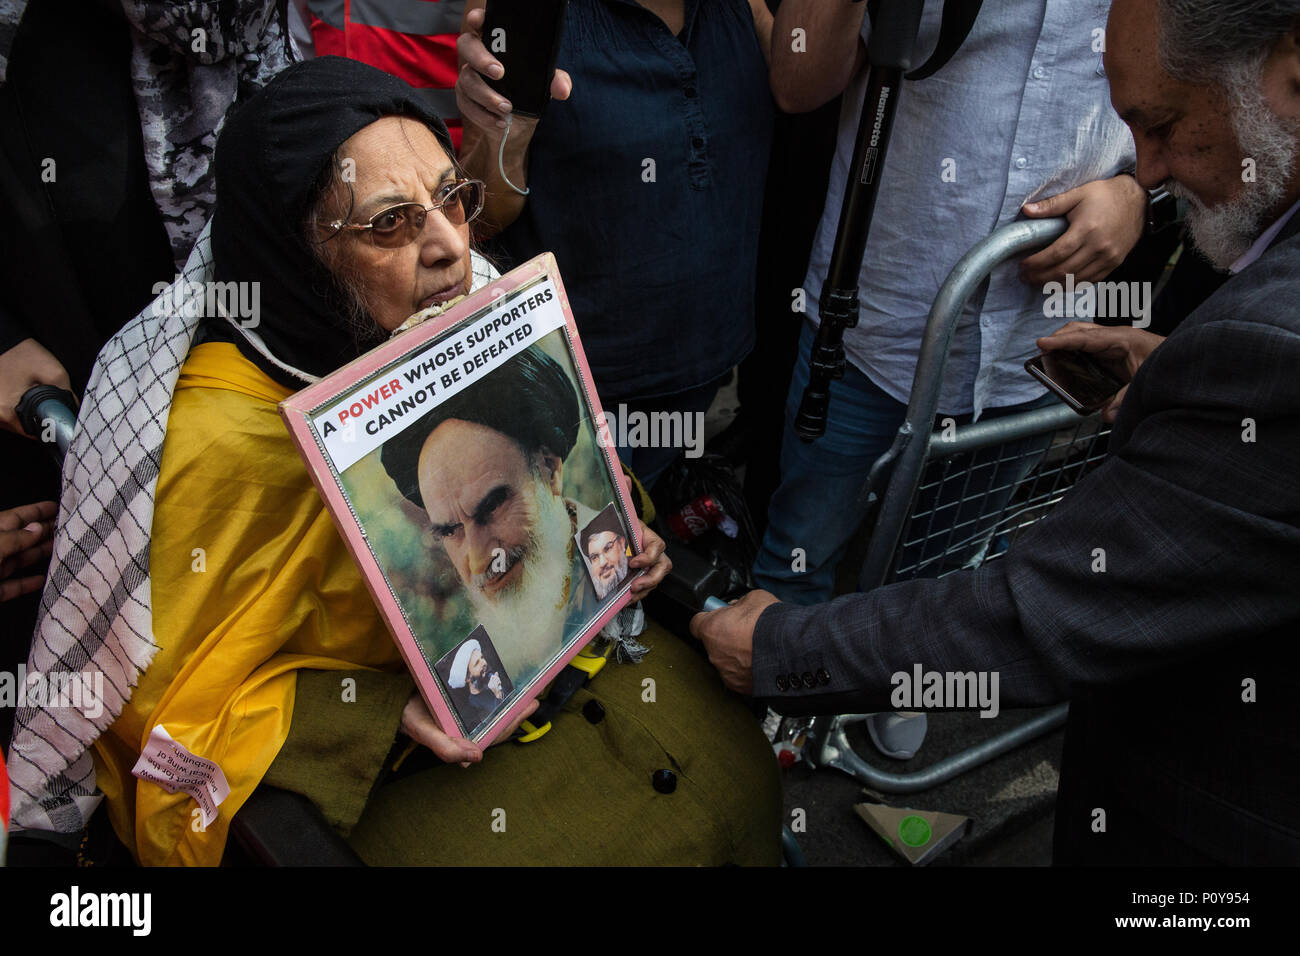 London, UK. 10th June, 2018. A woman in a wheelchair holding an image of the Supreme Leader of Iran Sayyid Ali Hosseini Khamenei is assisted in joining the pro-Palestinian Al Quds Day march organised by the Islamic Human Rights Commission after pro-Israel counter-protesters had tried to block her. An international event, it began in Iran in 1979. Quds is the Arabic name for Jerusalem. Credit: Mark Kerrison/Alamy Live News Stock Photo